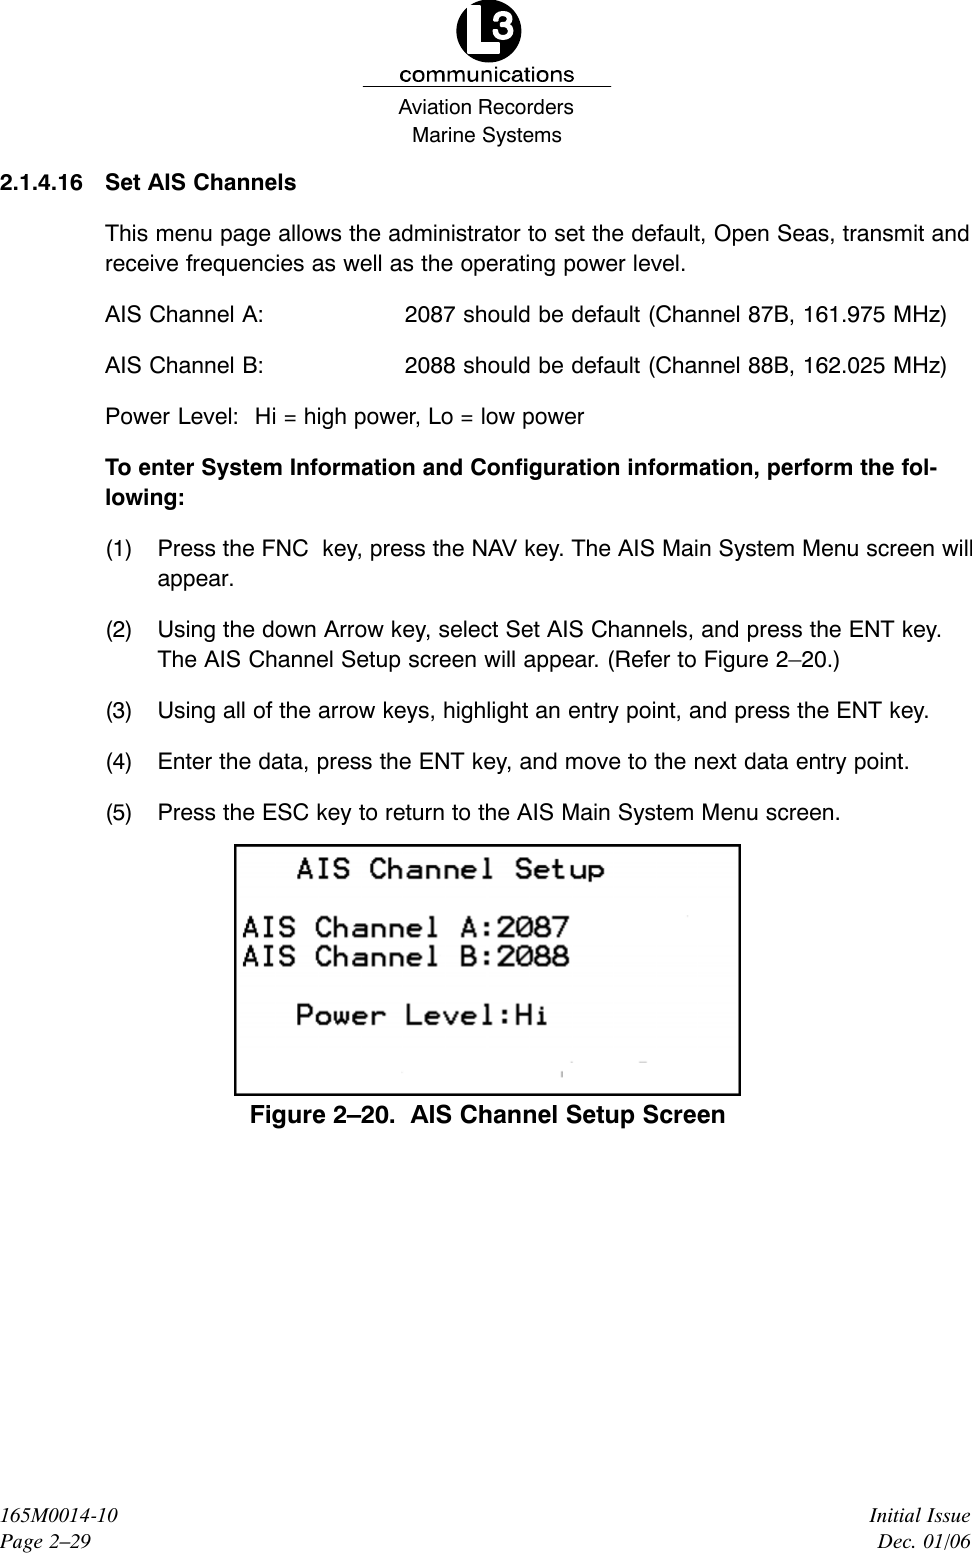 Marine SystemsAviation RecordersInitial IssueDec. 01/06165M0014-10Page 2–292.1.4.16 Set AIS ChannelsThis menu page allows the administrator to set the default, Open Seas, transmit andreceive frequencies as well as the operating power level.AIS Channel A: 2087 should be default (Channel 87B, 161.975 MHz)AIS Channel B: 2088 should be default (Channel 88B, 162.025 MHz)Power Level: Hi = high power, Lo = low powerTo enter System Information and Configuration information, perform the fol-lowing:(1) Press the FNC  key, press the NAV key. The AIS Main System Menu screen willappear.(2) Using the down Arrow key, select Set AIS Channels, and press the ENT key.The AIS Channel Setup screen will appear. (Refer to Figure 2–20.)(3) Using all of the arrow keys, highlight an entry point, and press the ENT key.(4) Enter the data, press the ENT key, and move to the next data entry point.(5) Press the ESC key to return to the AIS Main System Menu screen.Figure 2–20.  AIS Channel Setup Screen